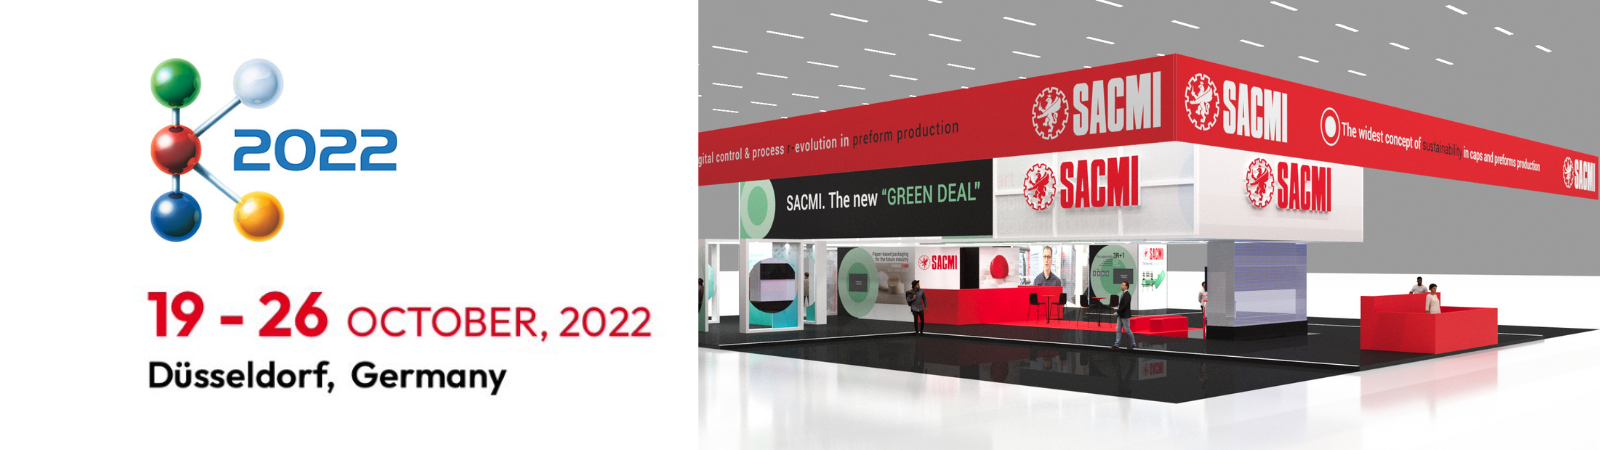 Digitalization and process control, the wider (and profitable) concept of sustainability: SACMI at K 2022